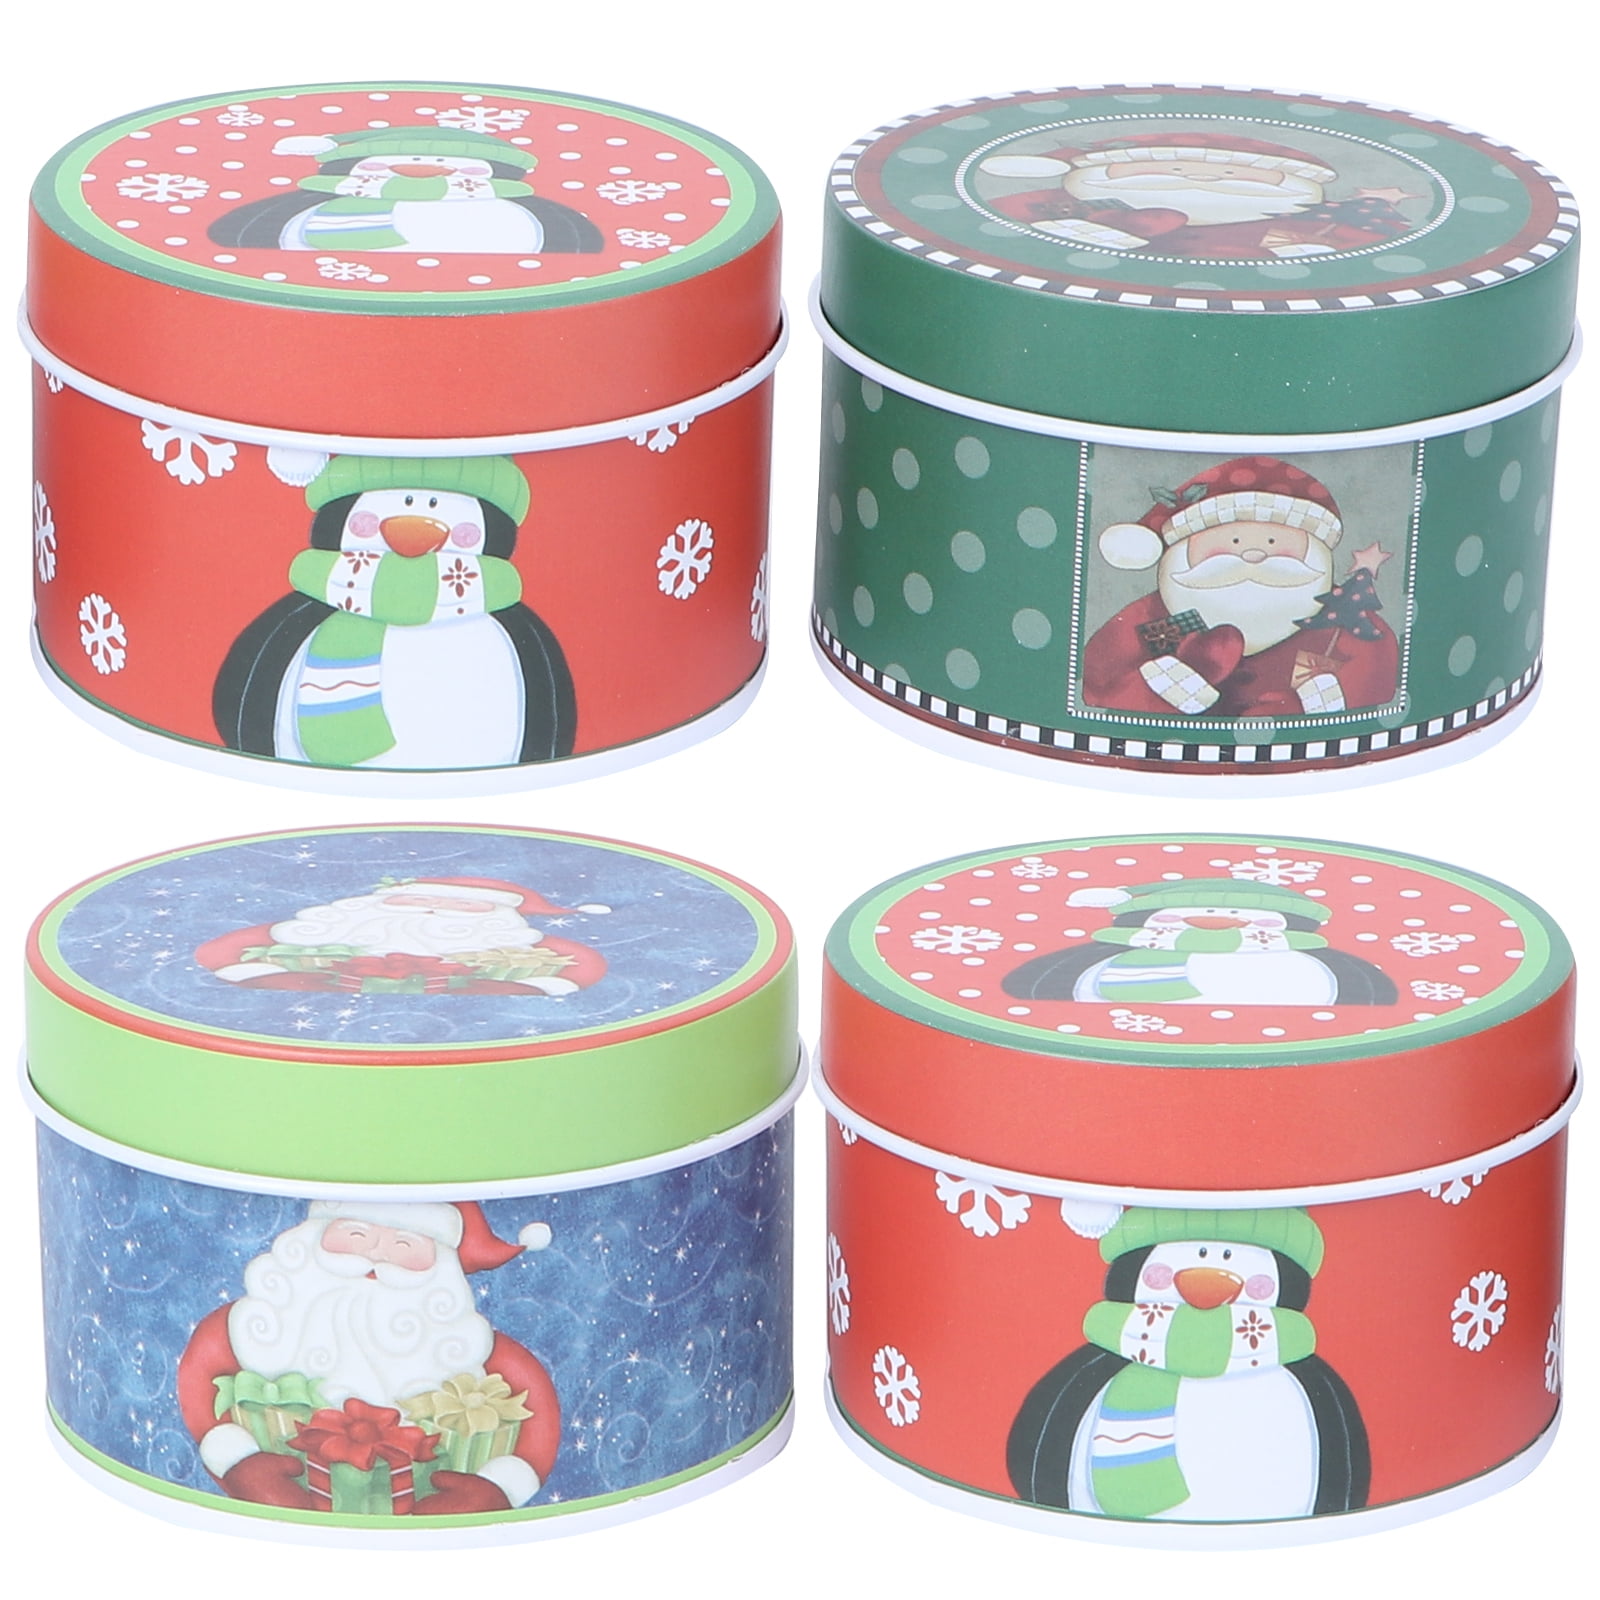 Hemoton 4pcs Christmas Themed Tinplate Box Round Candy Cookie Boxes Cute Tin Case Party Supplies Random Pattern 